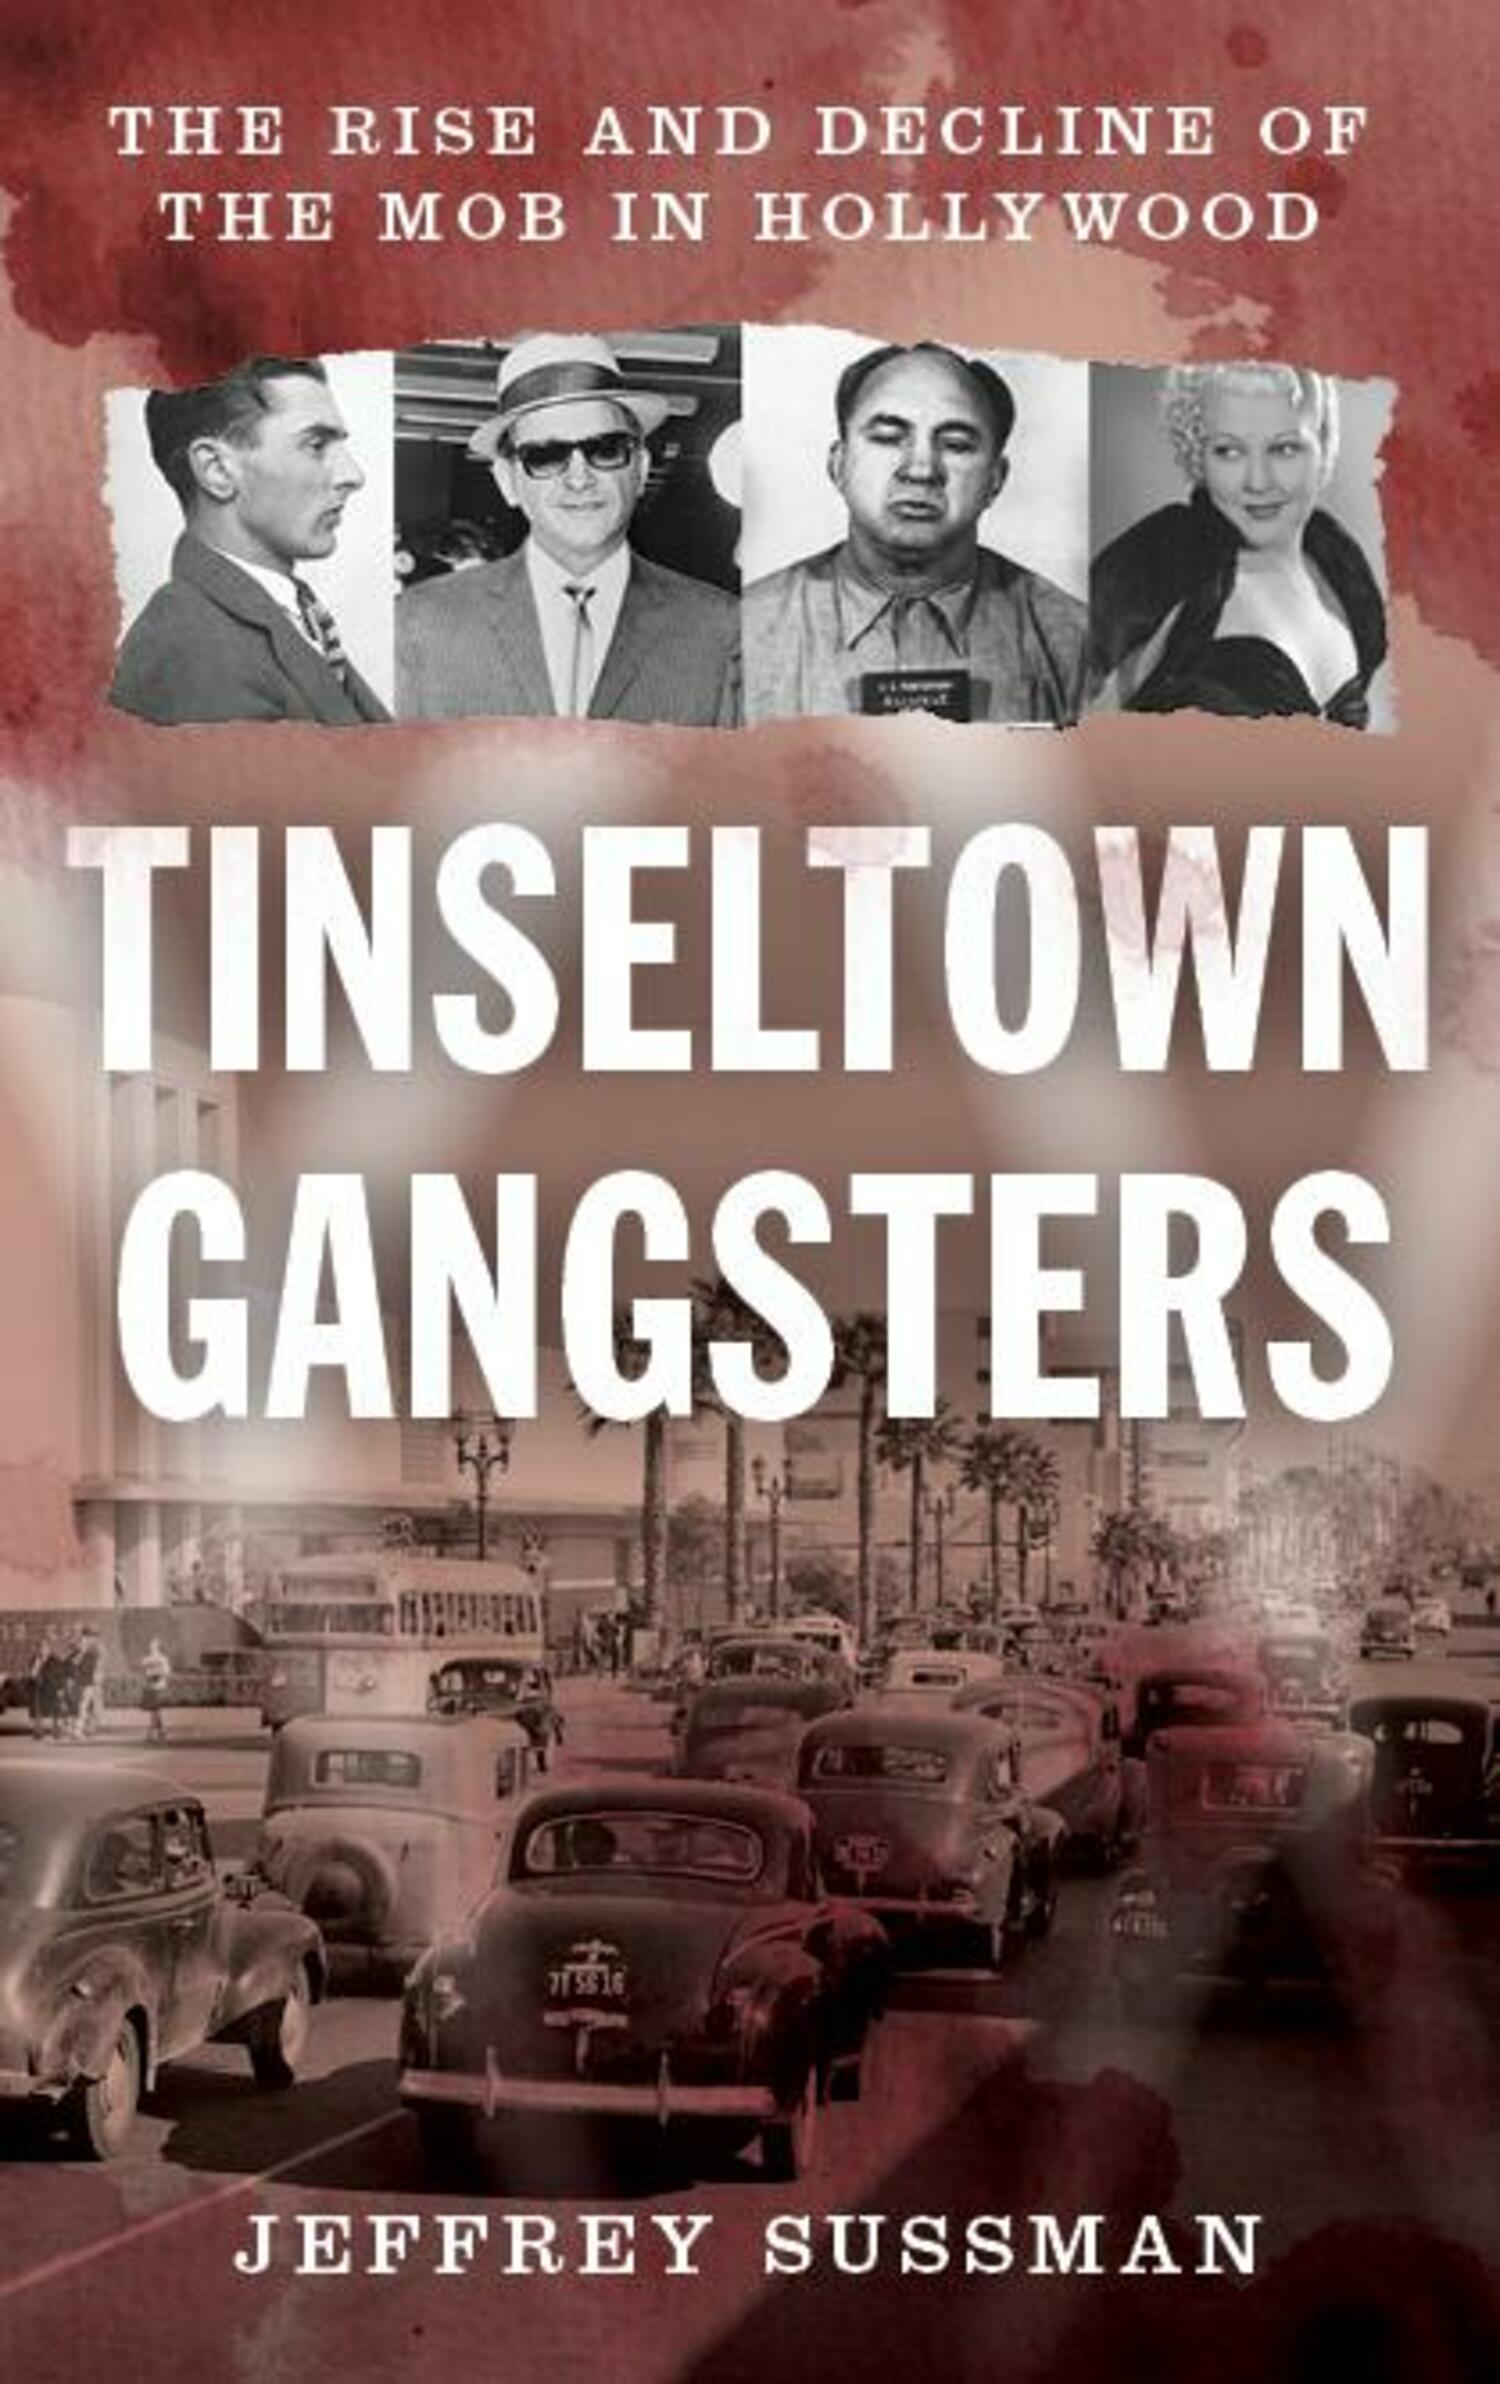 The cover of Jeffrey Sussman's new book, “Tinseltown Gangsters: The Rise and Decline of the Mob in Hollywood.”